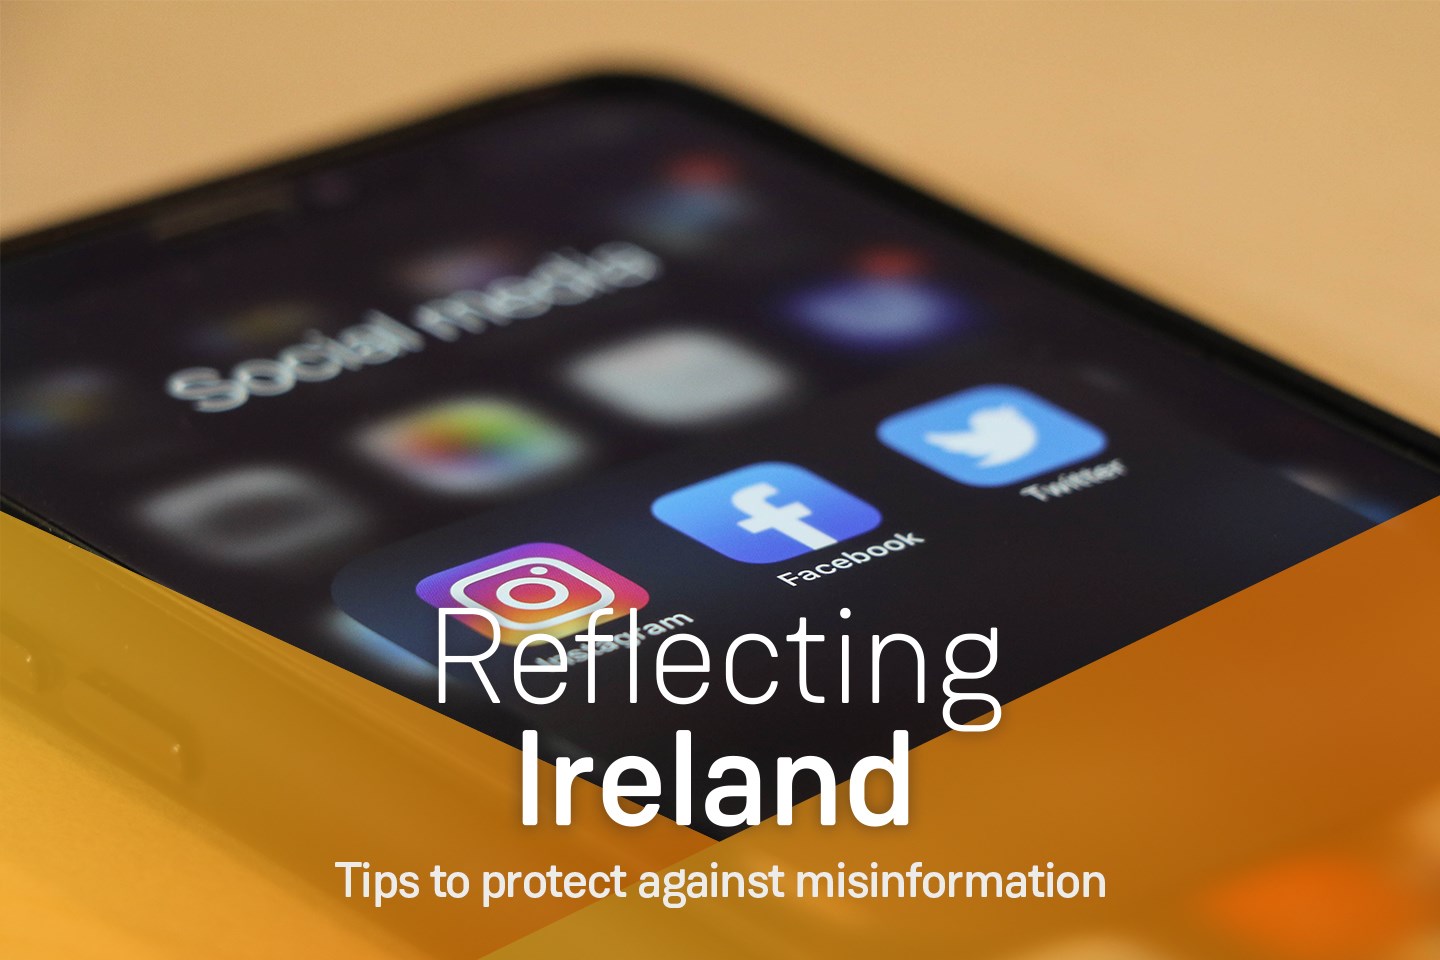 Close up on a mobile phone screen with social media , text on image 'Reflecting Ireland, Tips to protect against missinformation'